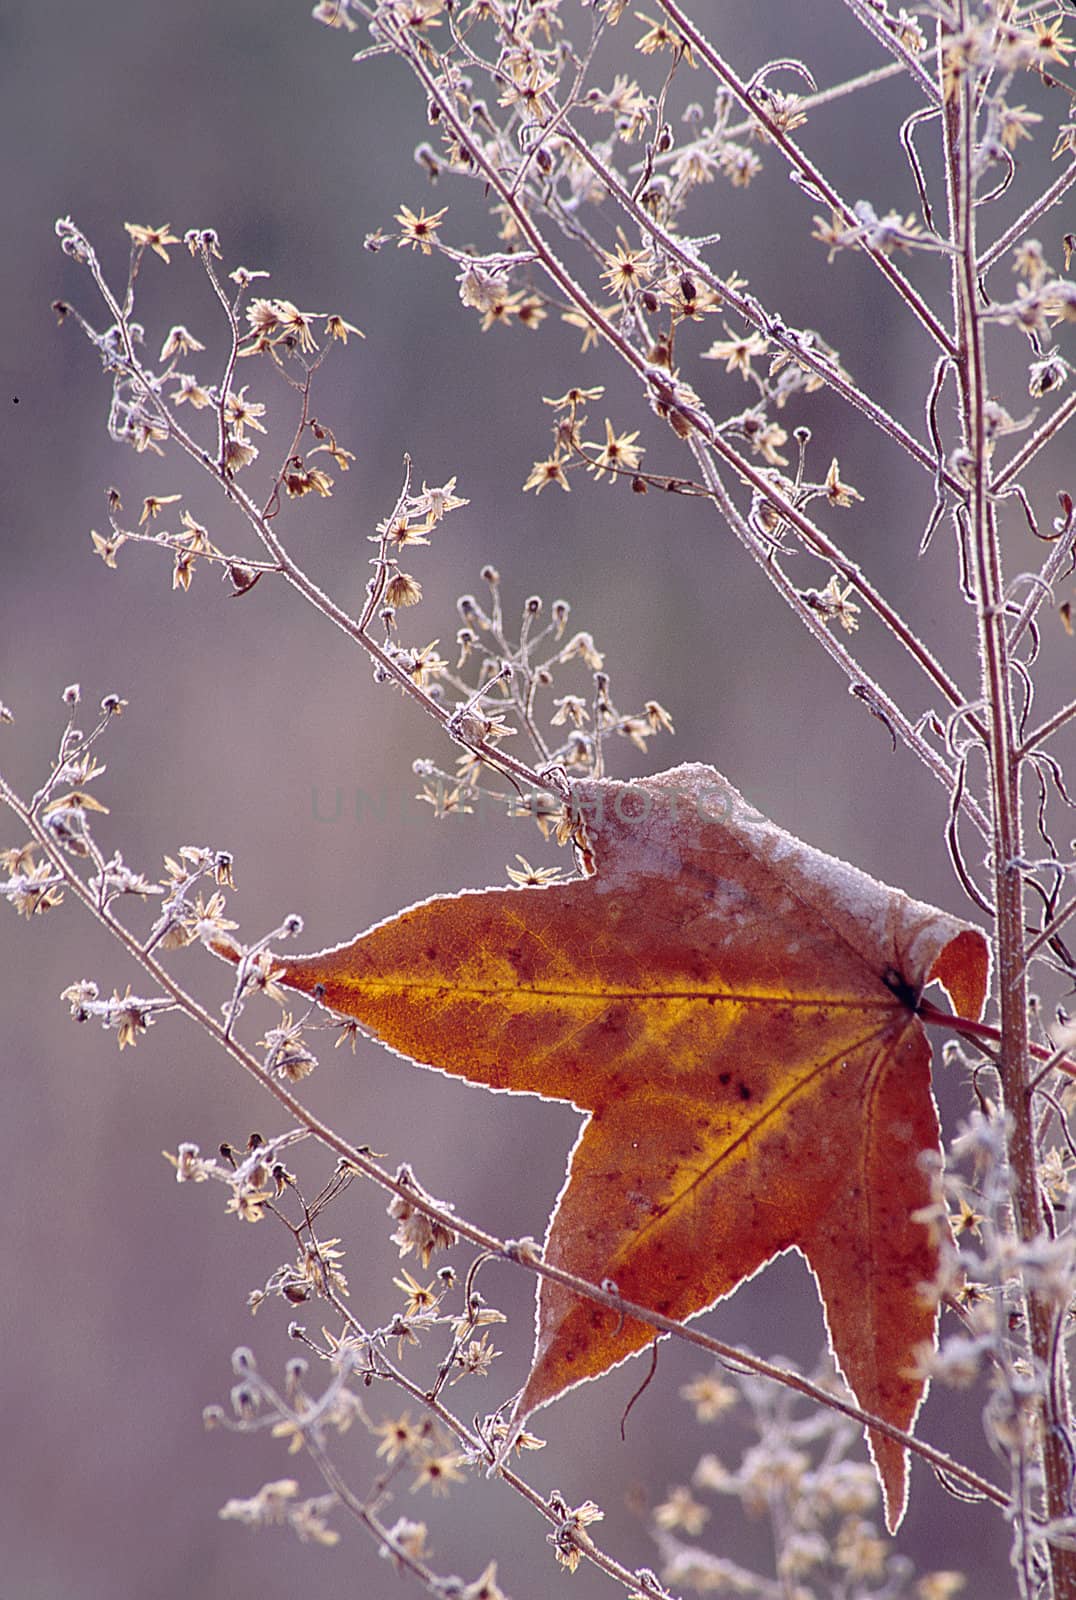 Sweetgum leaf rimmed in frost caught in a frosty weed